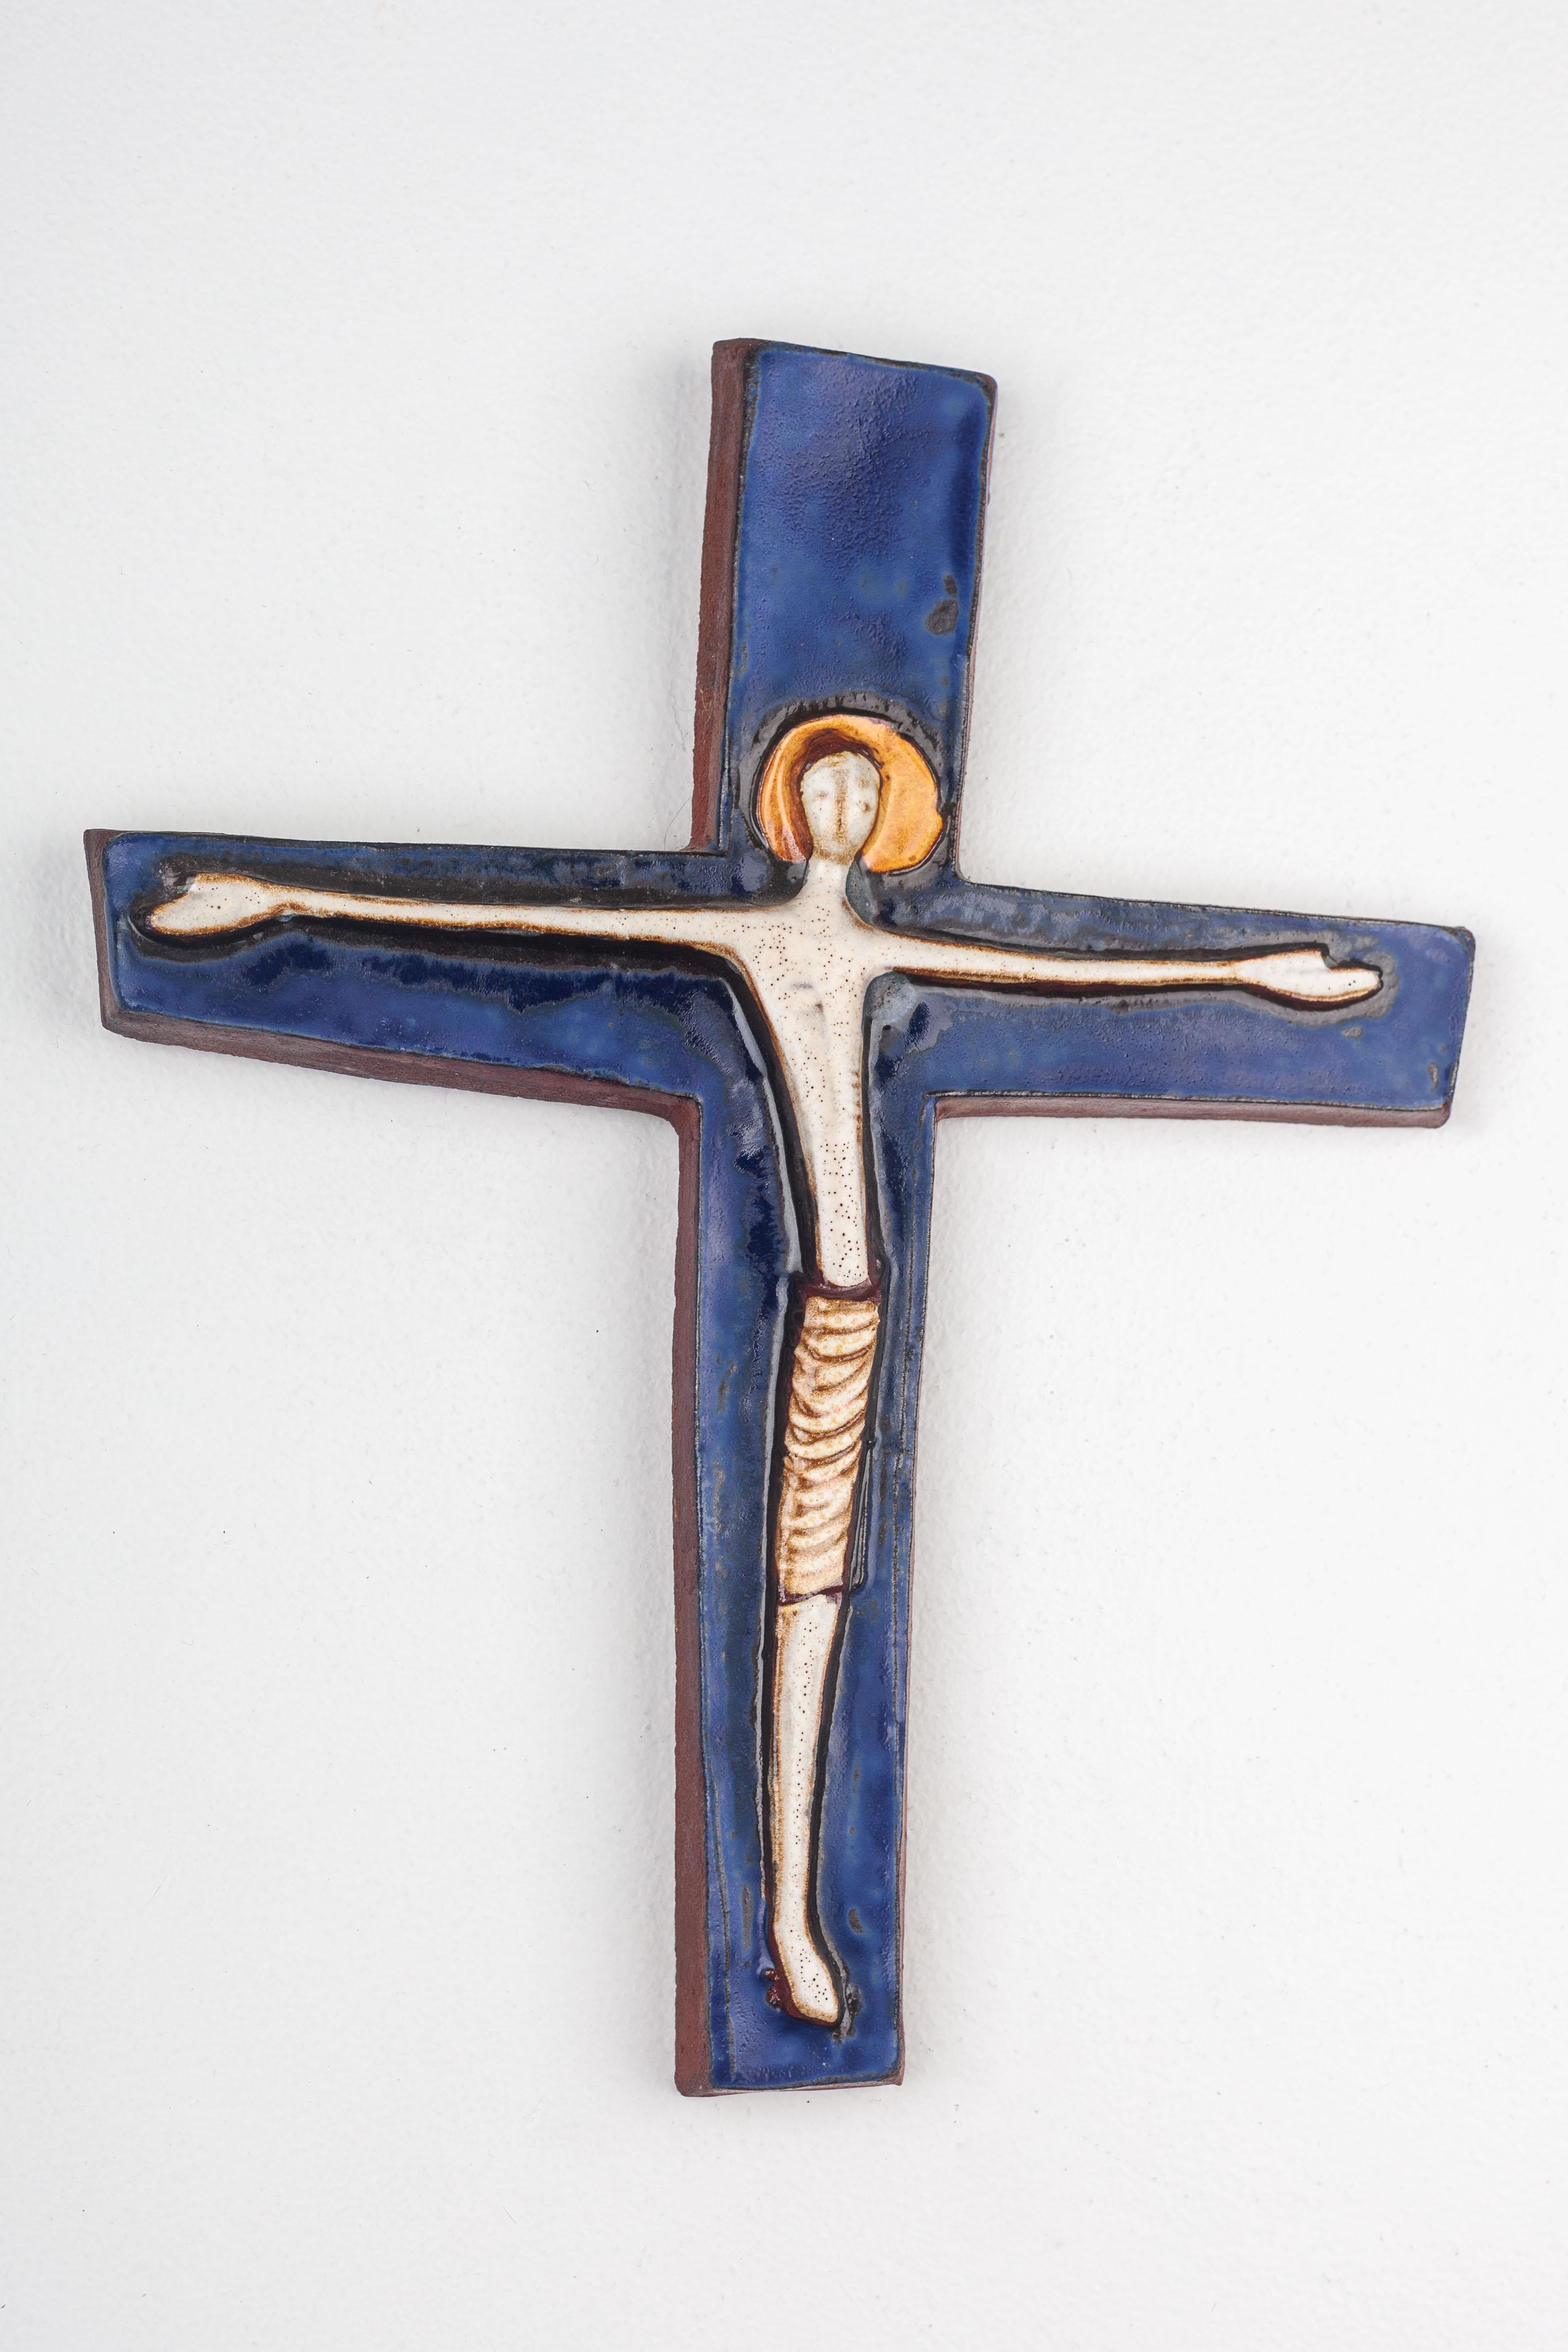 This solemn and evocative ceramic crucifix is a representative work of mid-century modern religious art, handcrafted by a European studio pottery artist. The figure of Christ is depicted in a minimalist style, rendered with an emphasis on line and